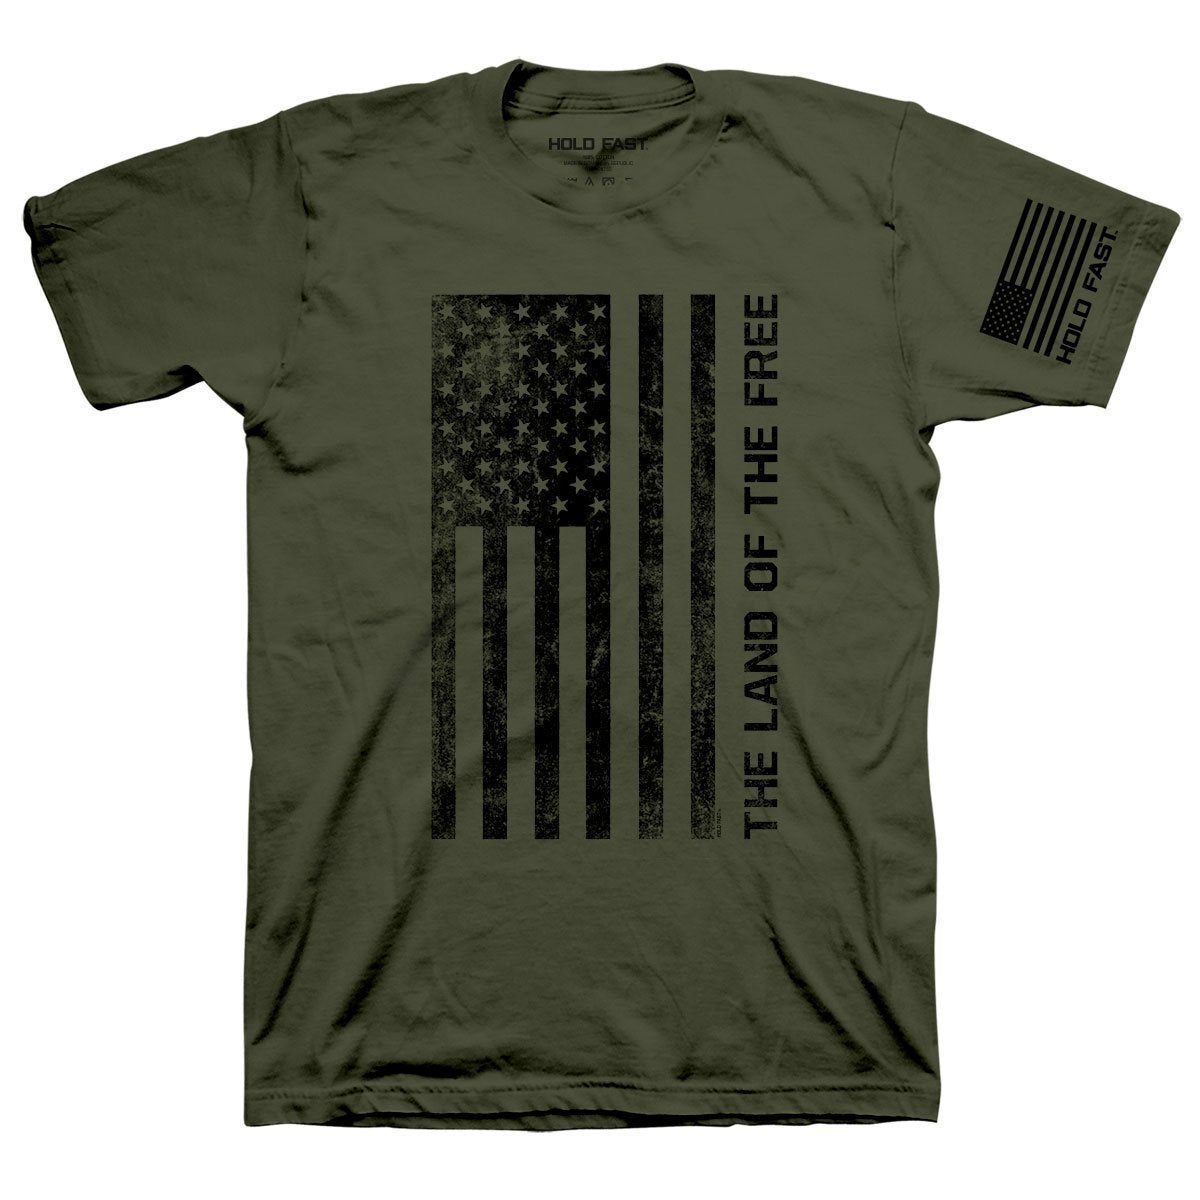 Wrap your love of country around you in this “Freedom Flag” T-shirt by Hold Fast™ in City Green. This image calls to mind John 15:13, where we are told that there is no greater love than for one to lay down his life for his friends. Of course, the beauty of this verse is that it reminds us of fallen friends and family, with the backdrop of Christ Himself! His ultimate, eternal sacrifice is the best flag we can rally around. front view. Sizes Med-3x.